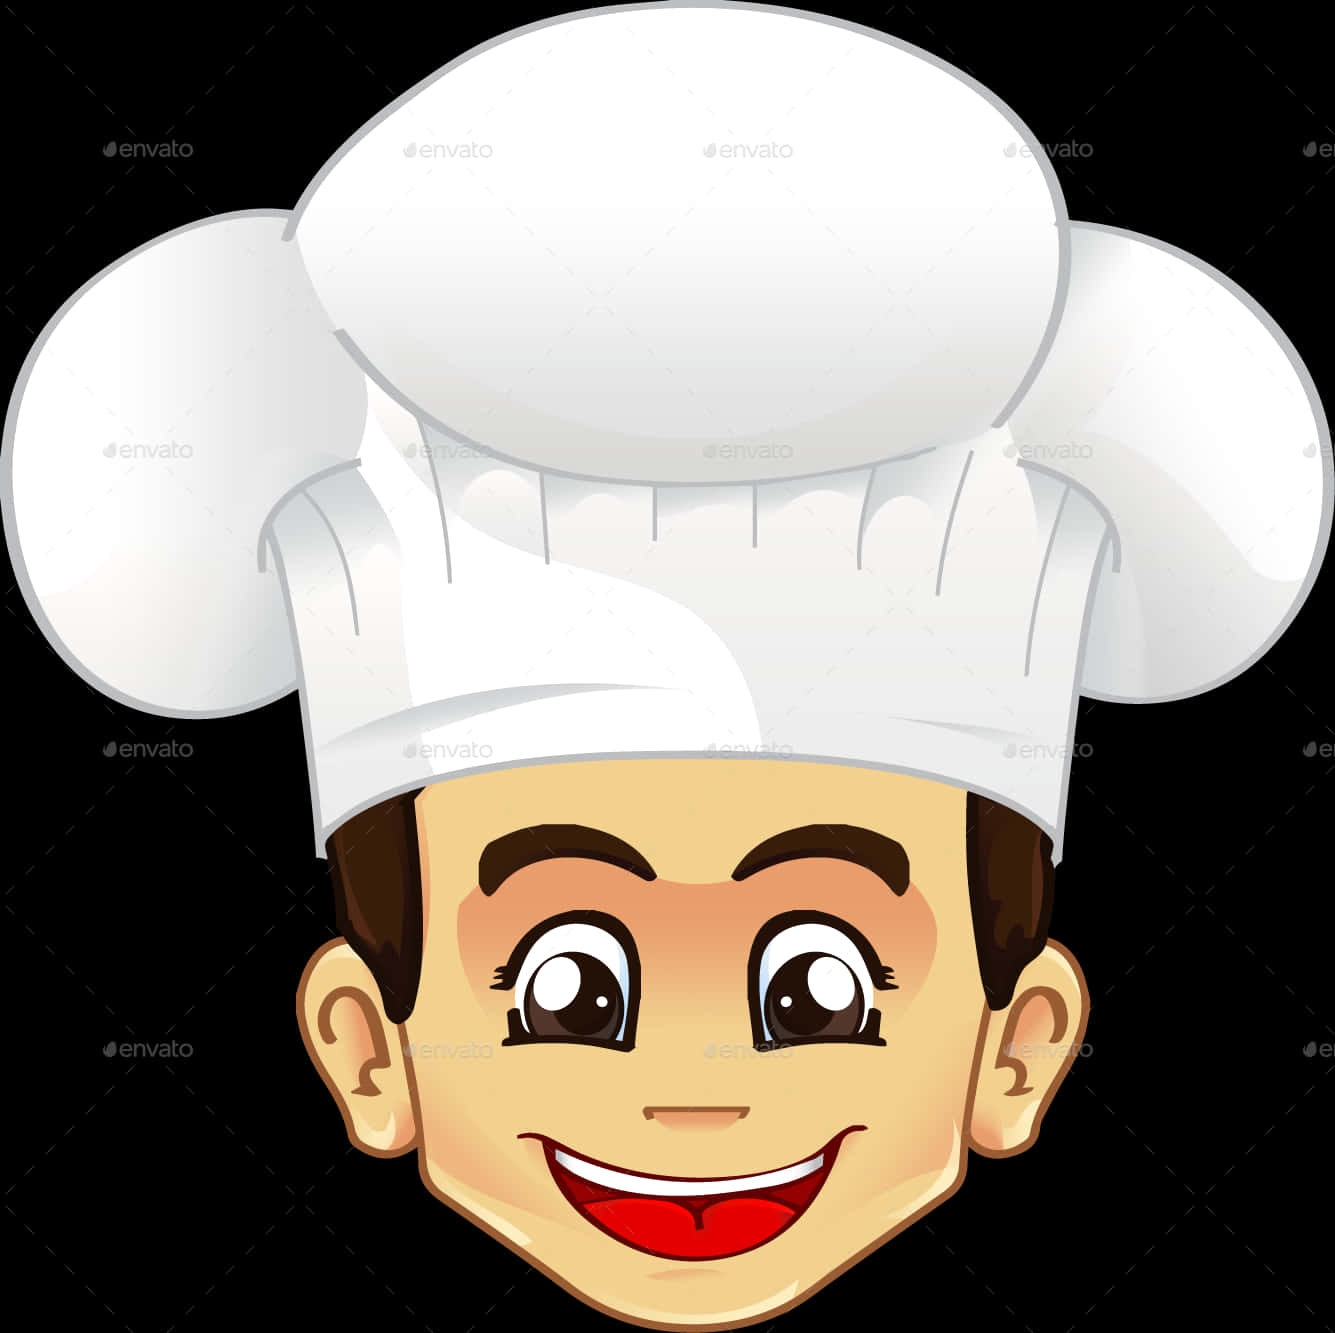 Smiling Chef Cartoon Character PNG image